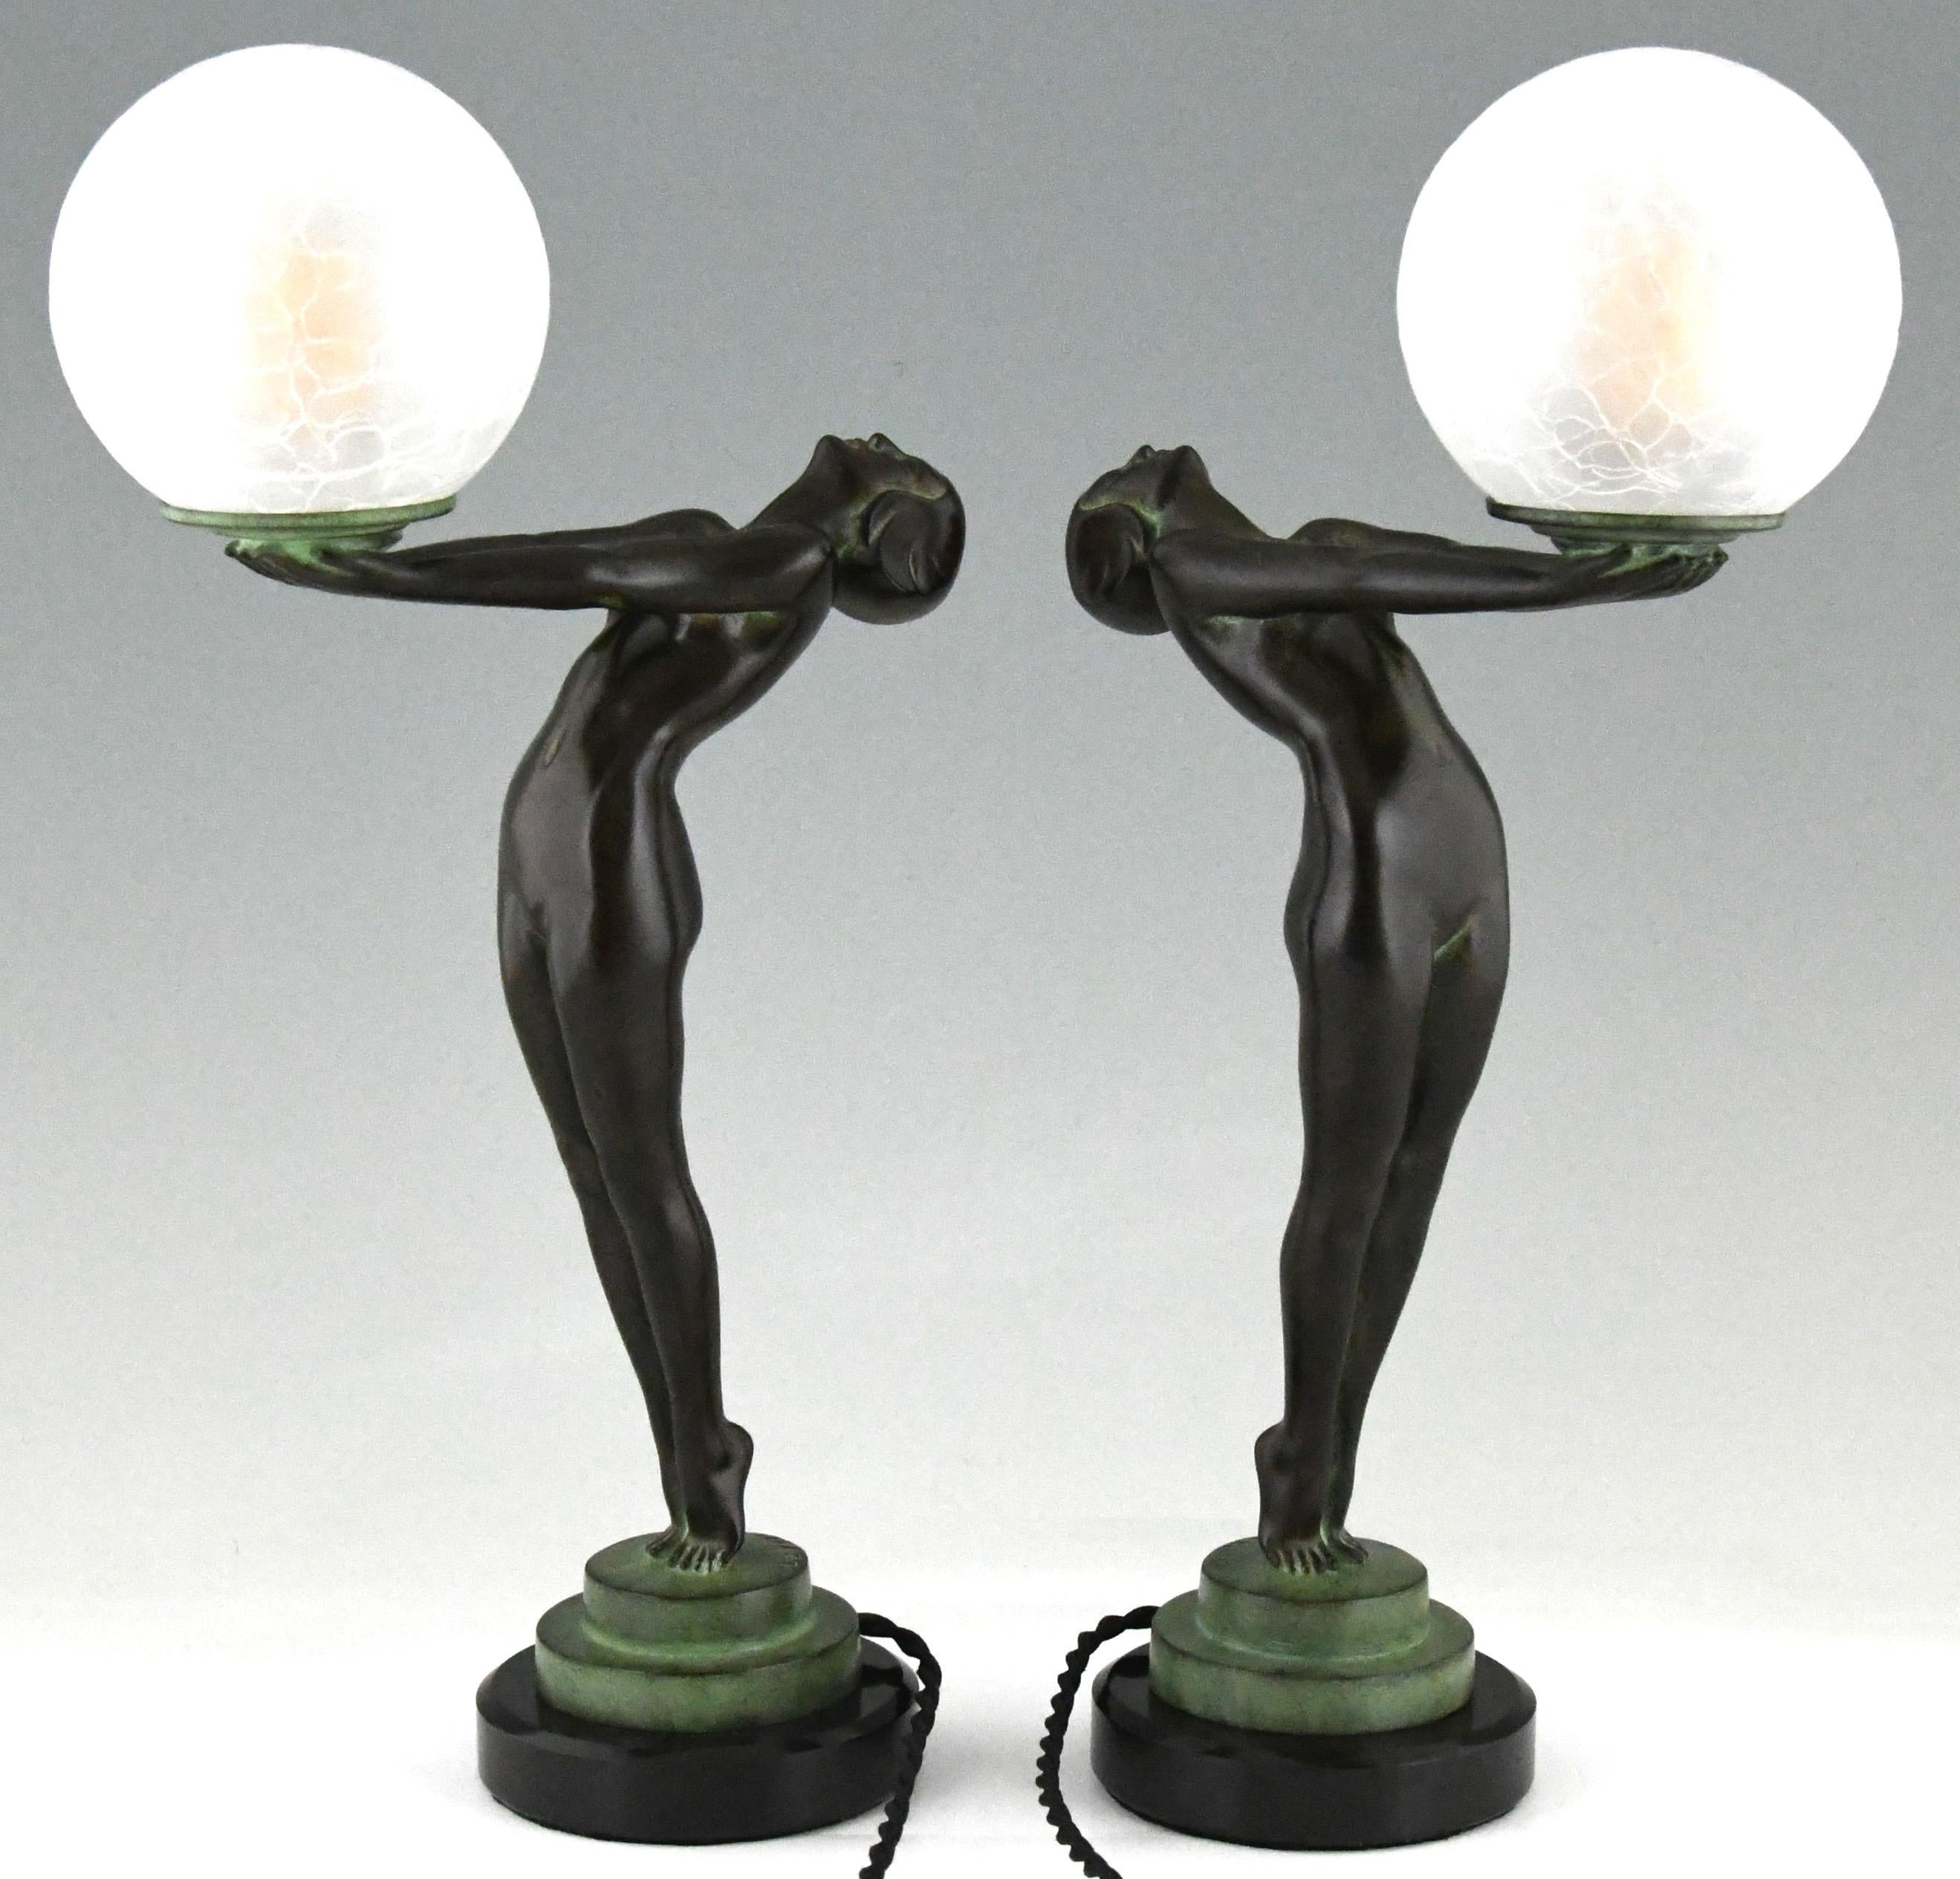 Patinated Pair of Art Deco Style Lamps Clarté Standing Nude with Globe by Max Le Verrier For Sale